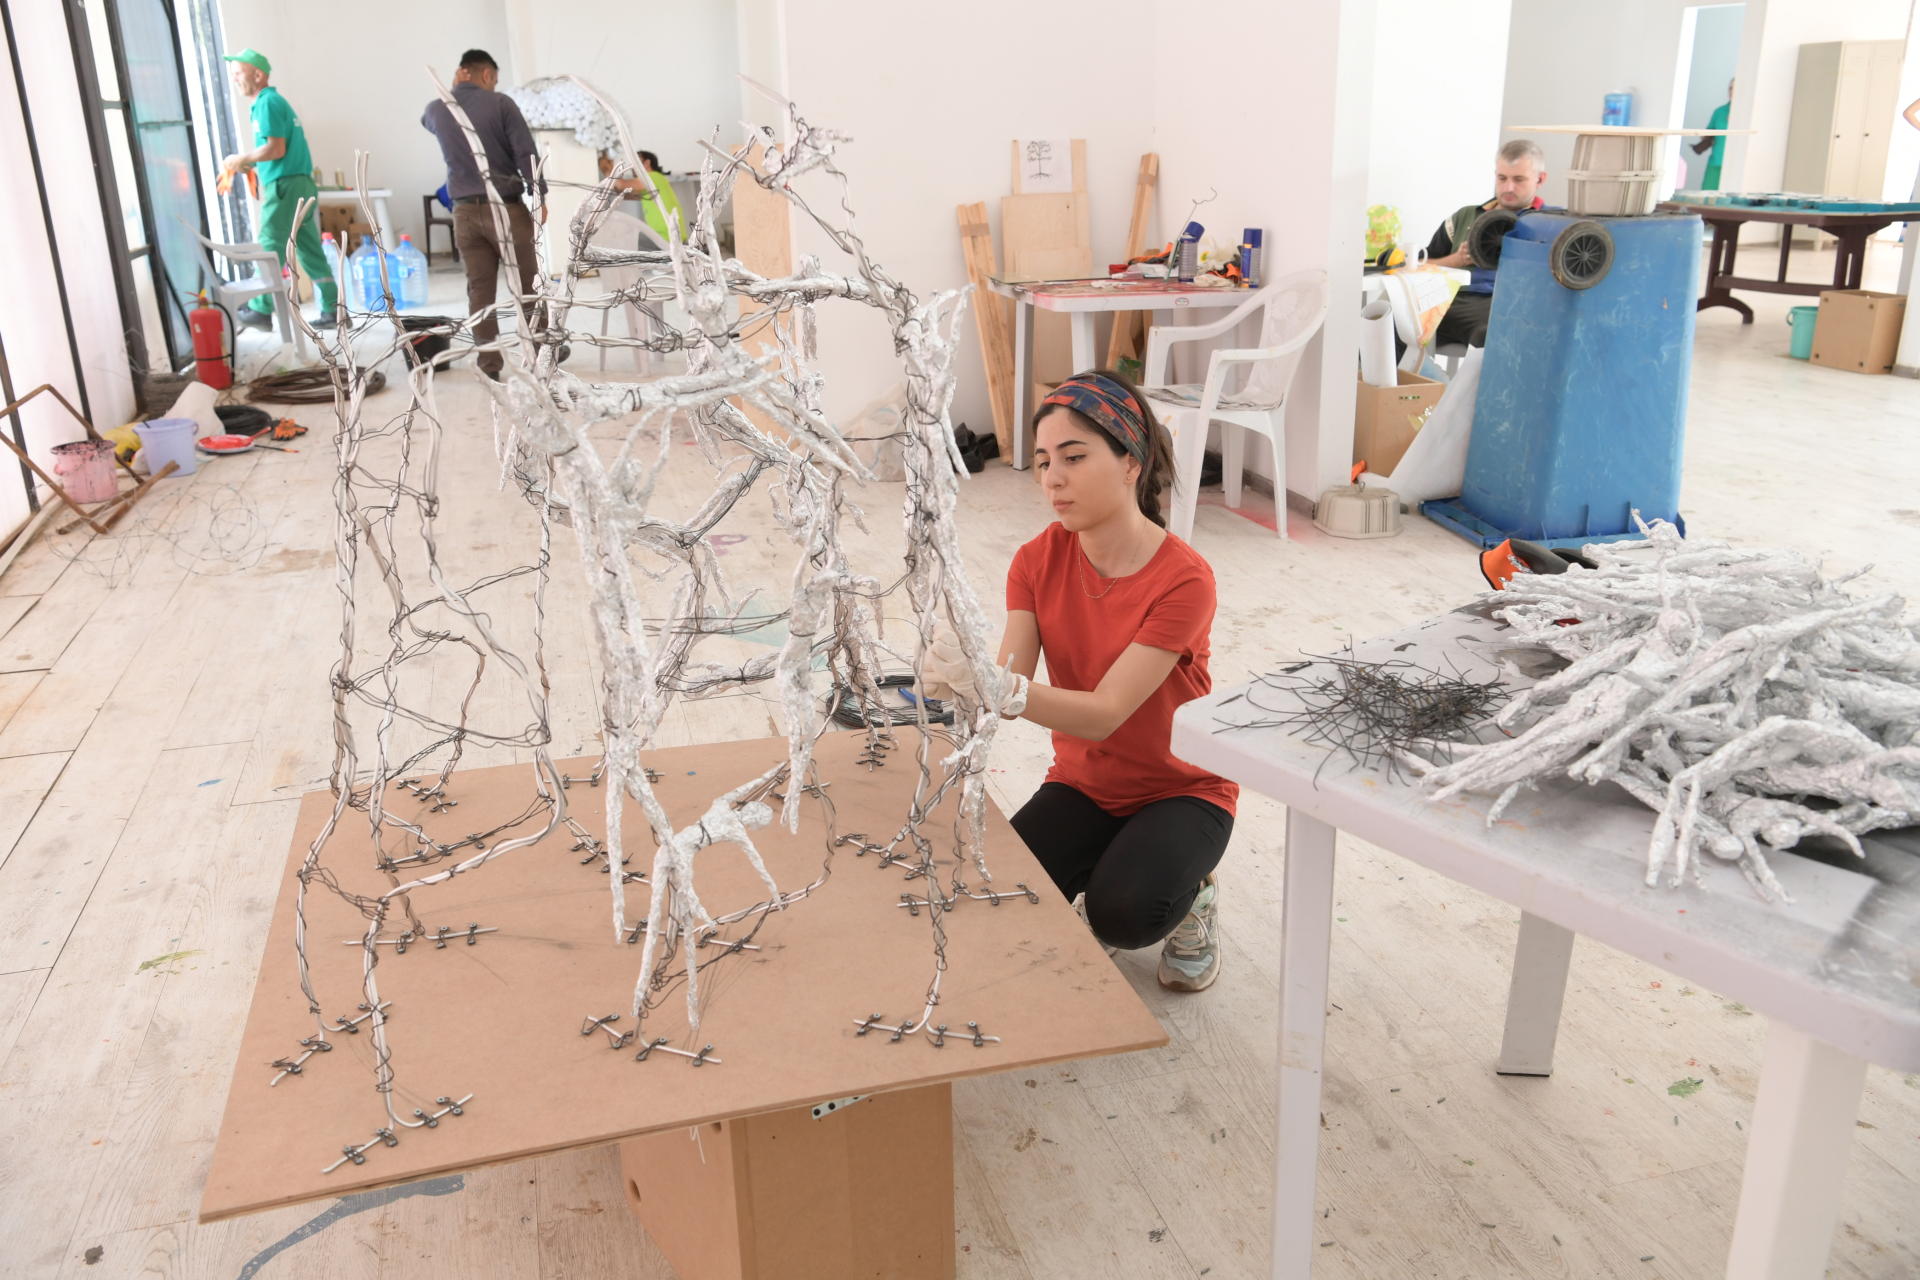 Int’l Exhibition “From Waste to Art” to open as part of Nasimi Festival in Azerbaijan (PHOTO)